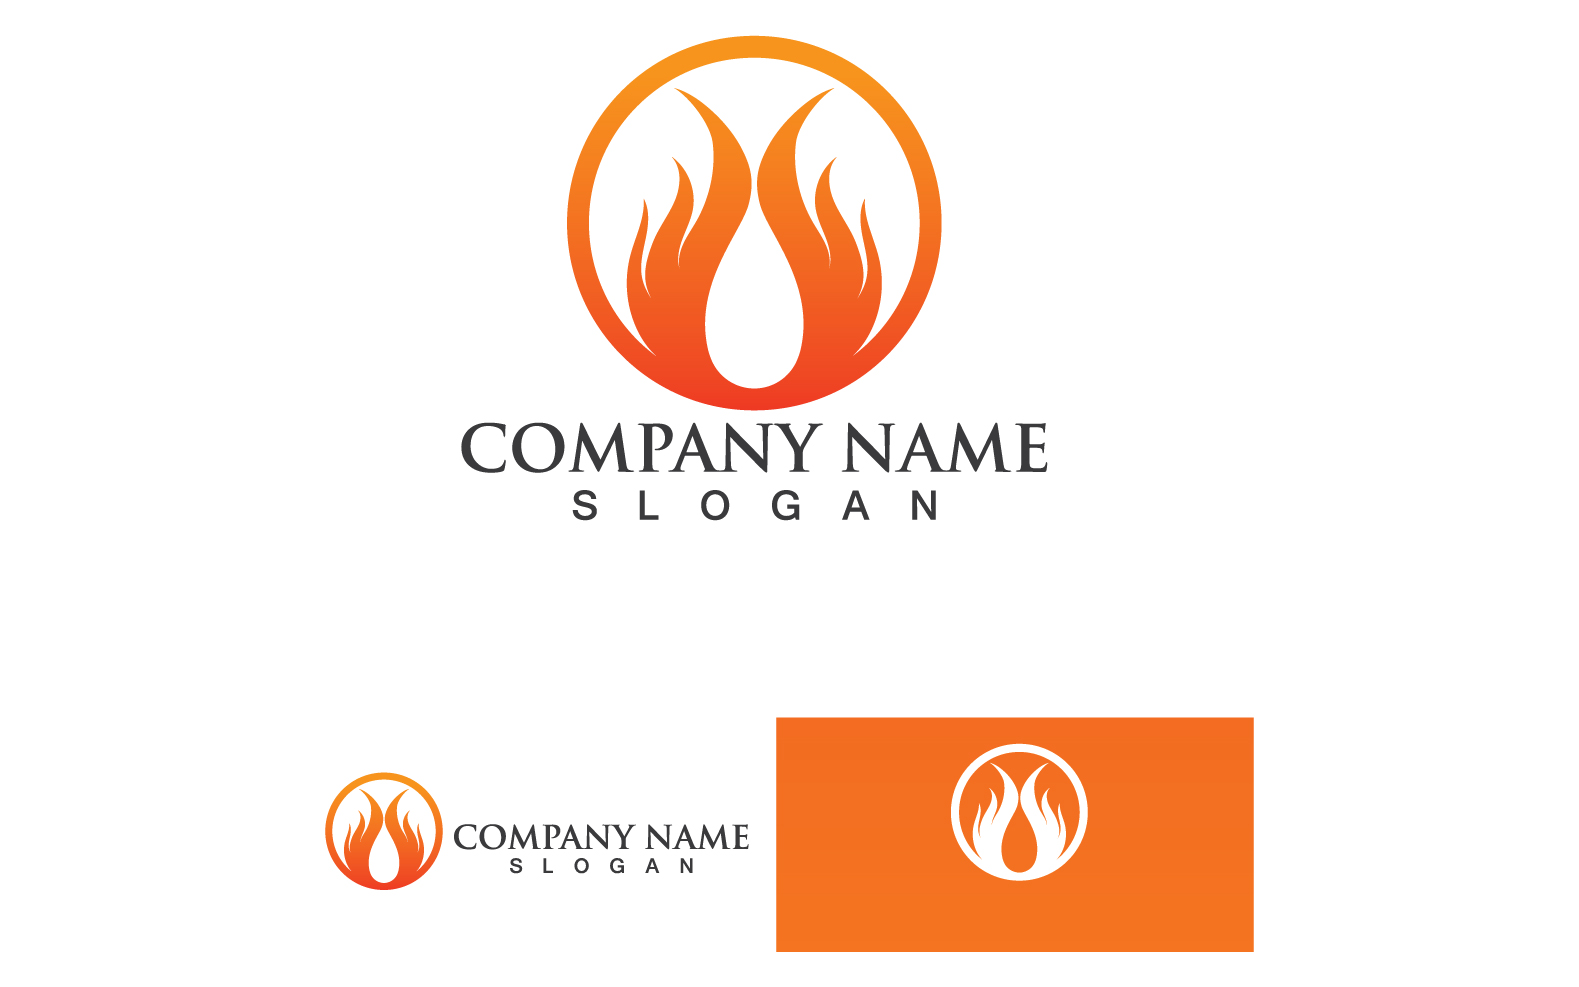 Wing Bird Business Logo Your Company Name V47